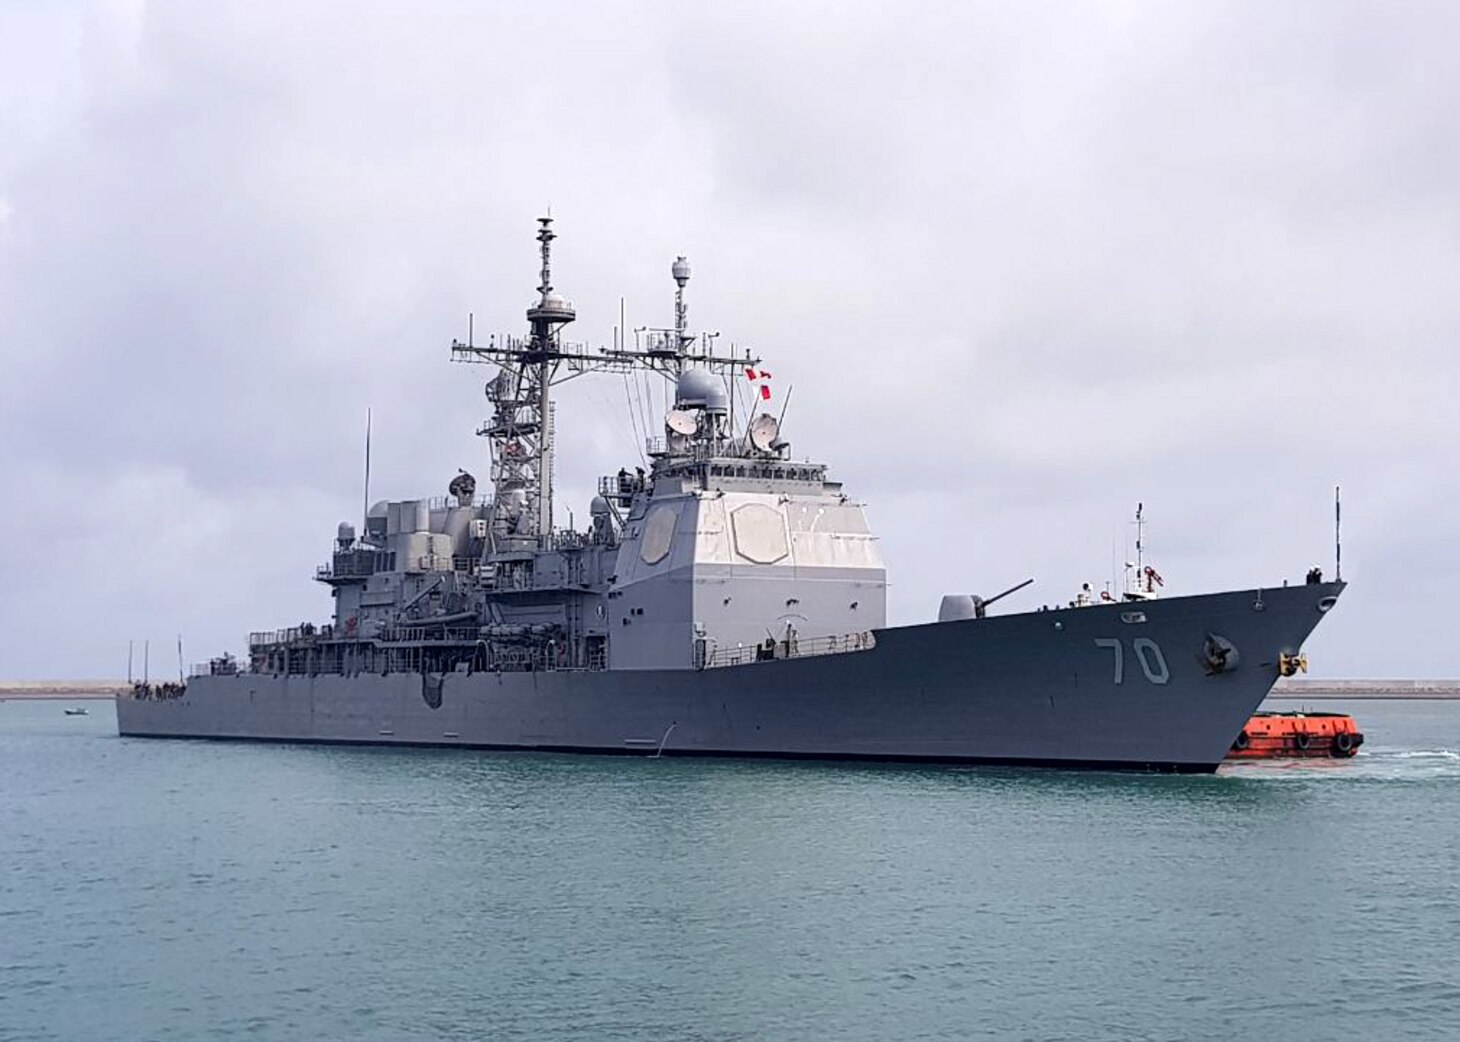 170611-N-OU129-003 COLOMBO, Sri Lanka (June 11, 2017) The Ticonderoga-class guided-missile cruiser USS Lake Erie (CG 70) arrived in Colombo, Sri Lanka, June 11 to support humanitarian assistance operations in the wake of severe flooding and landslides that devastated many regions of the country.  Recent heavy rainfalls brought by a southwest monsoon triggered flooding and landslides throughout the country, displacing thousands of people and causing significant damage to homes and buildings.  (U.S. Navy photo by Mass Communication Specialist 2nd Class Joshua Fulton/RELEASED)